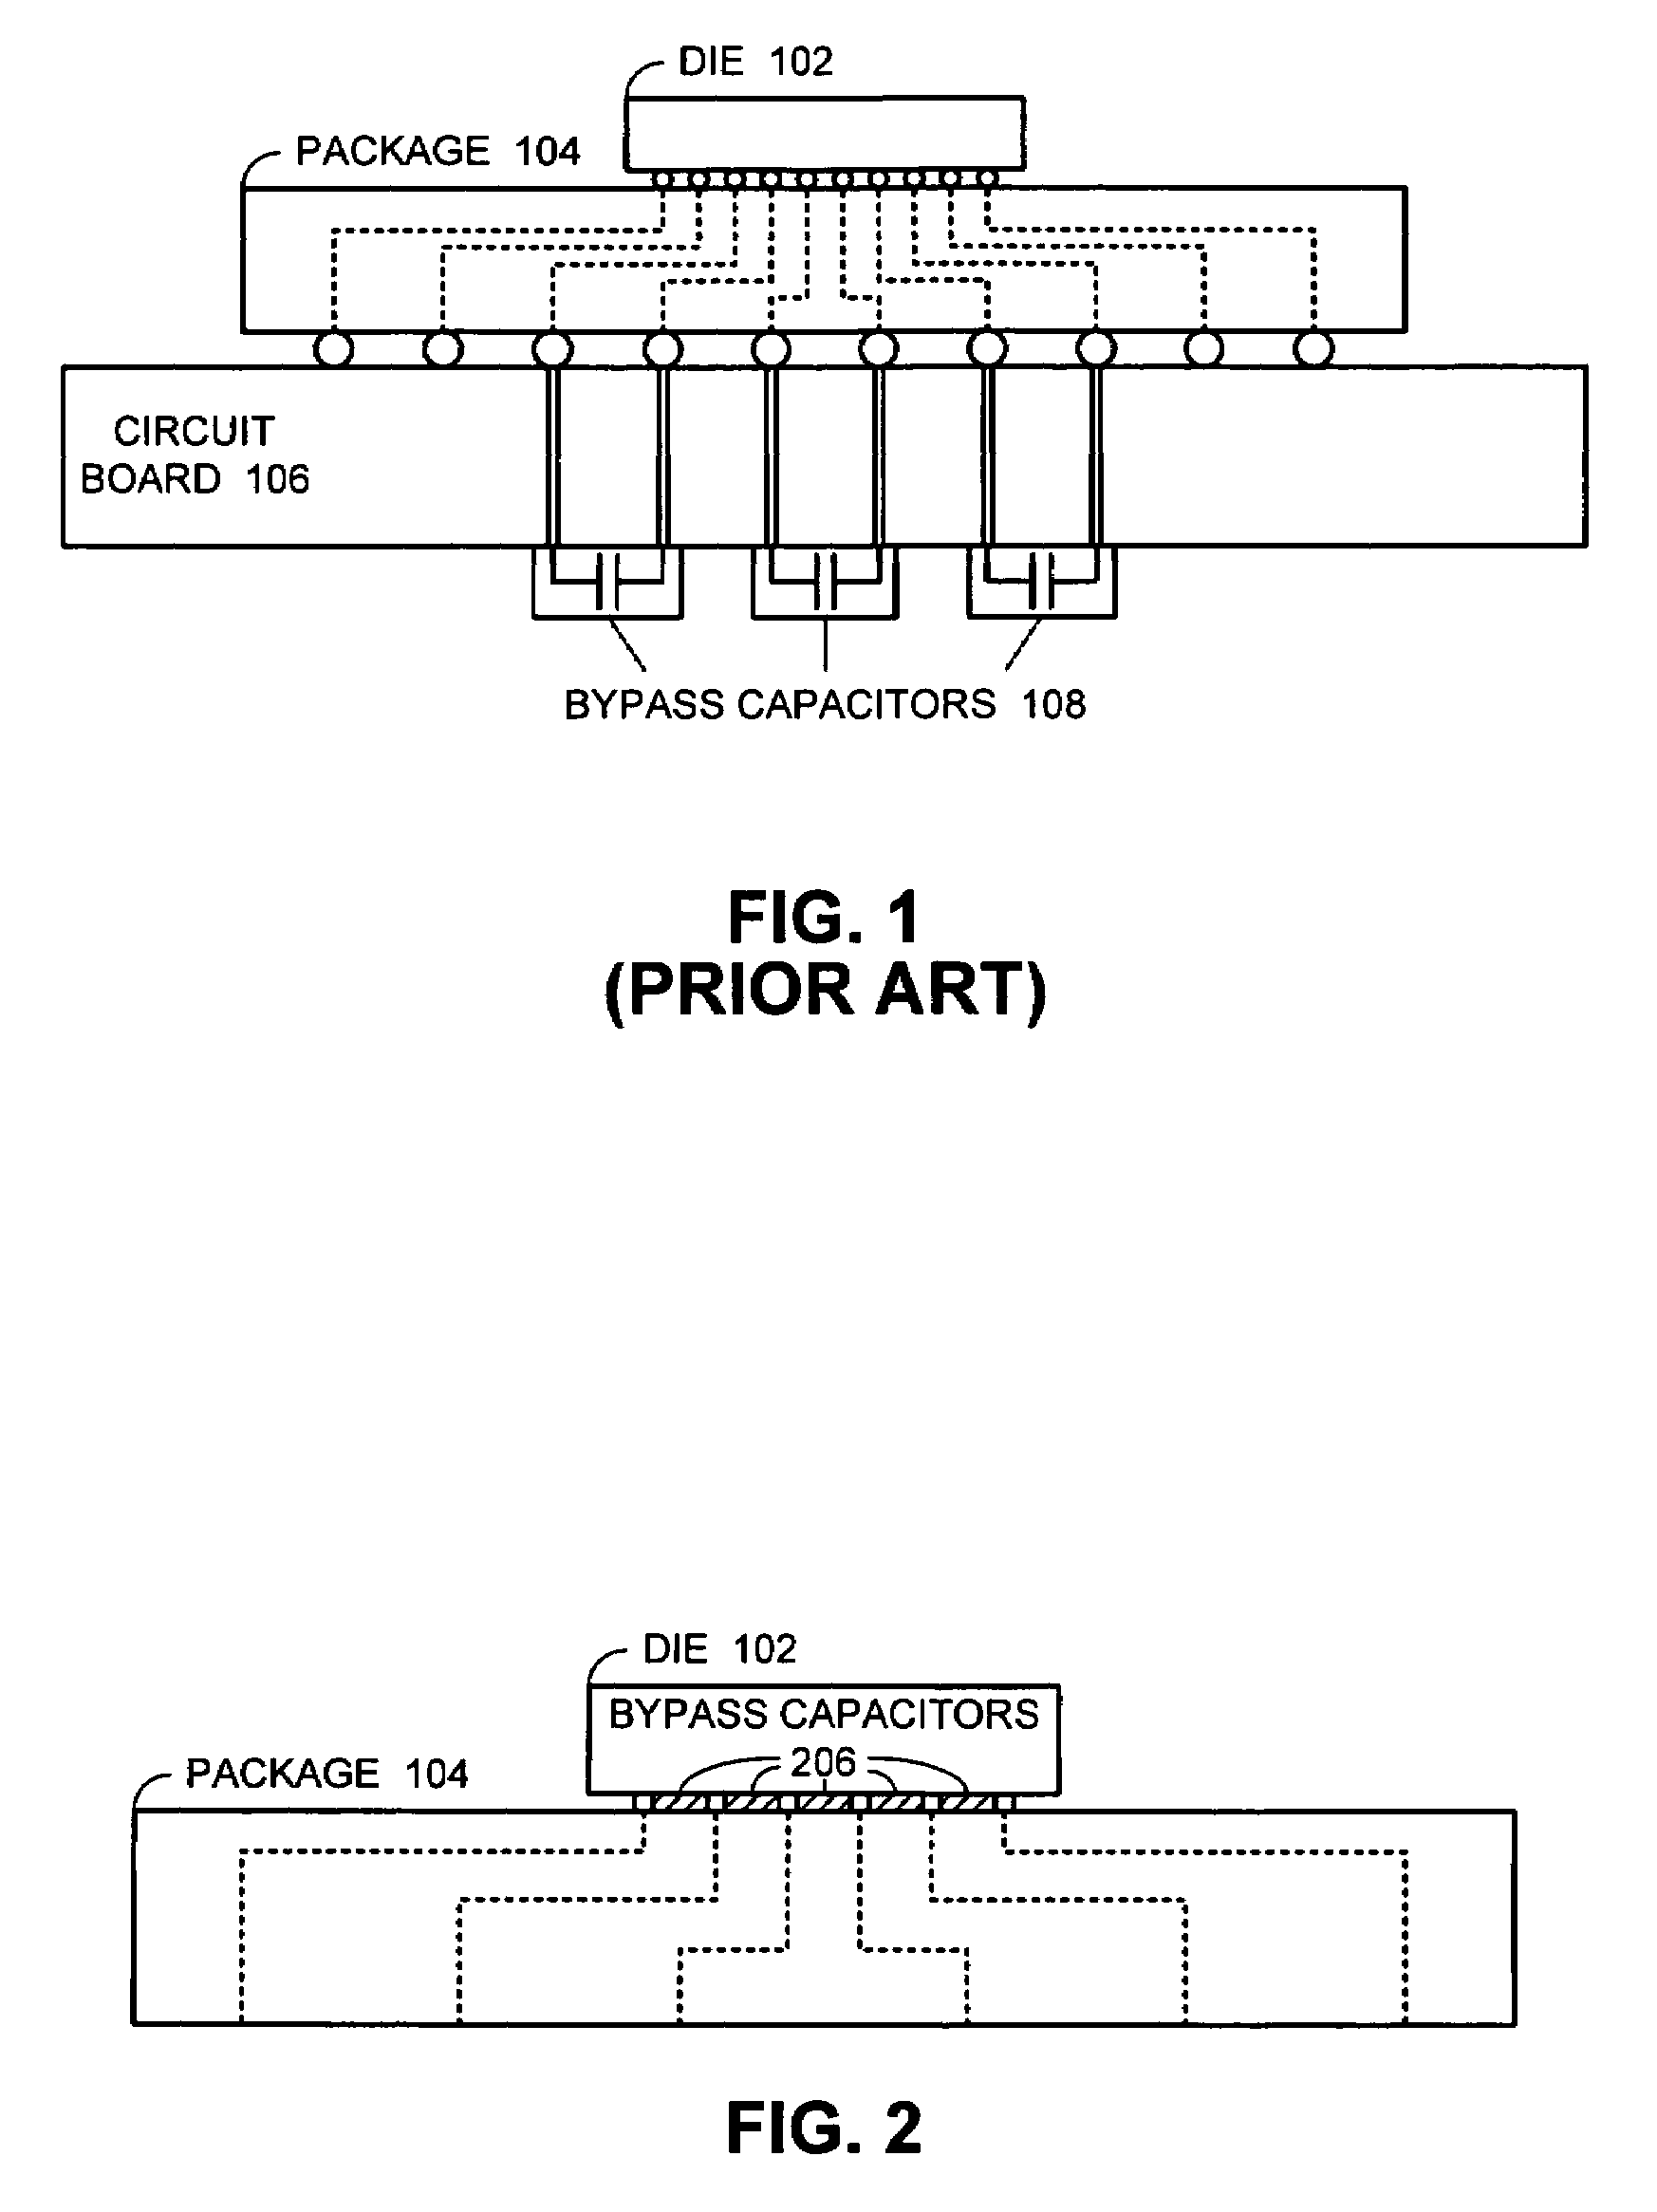 Apparatus for providing capacitive decoupling between on-die power and ground conductors